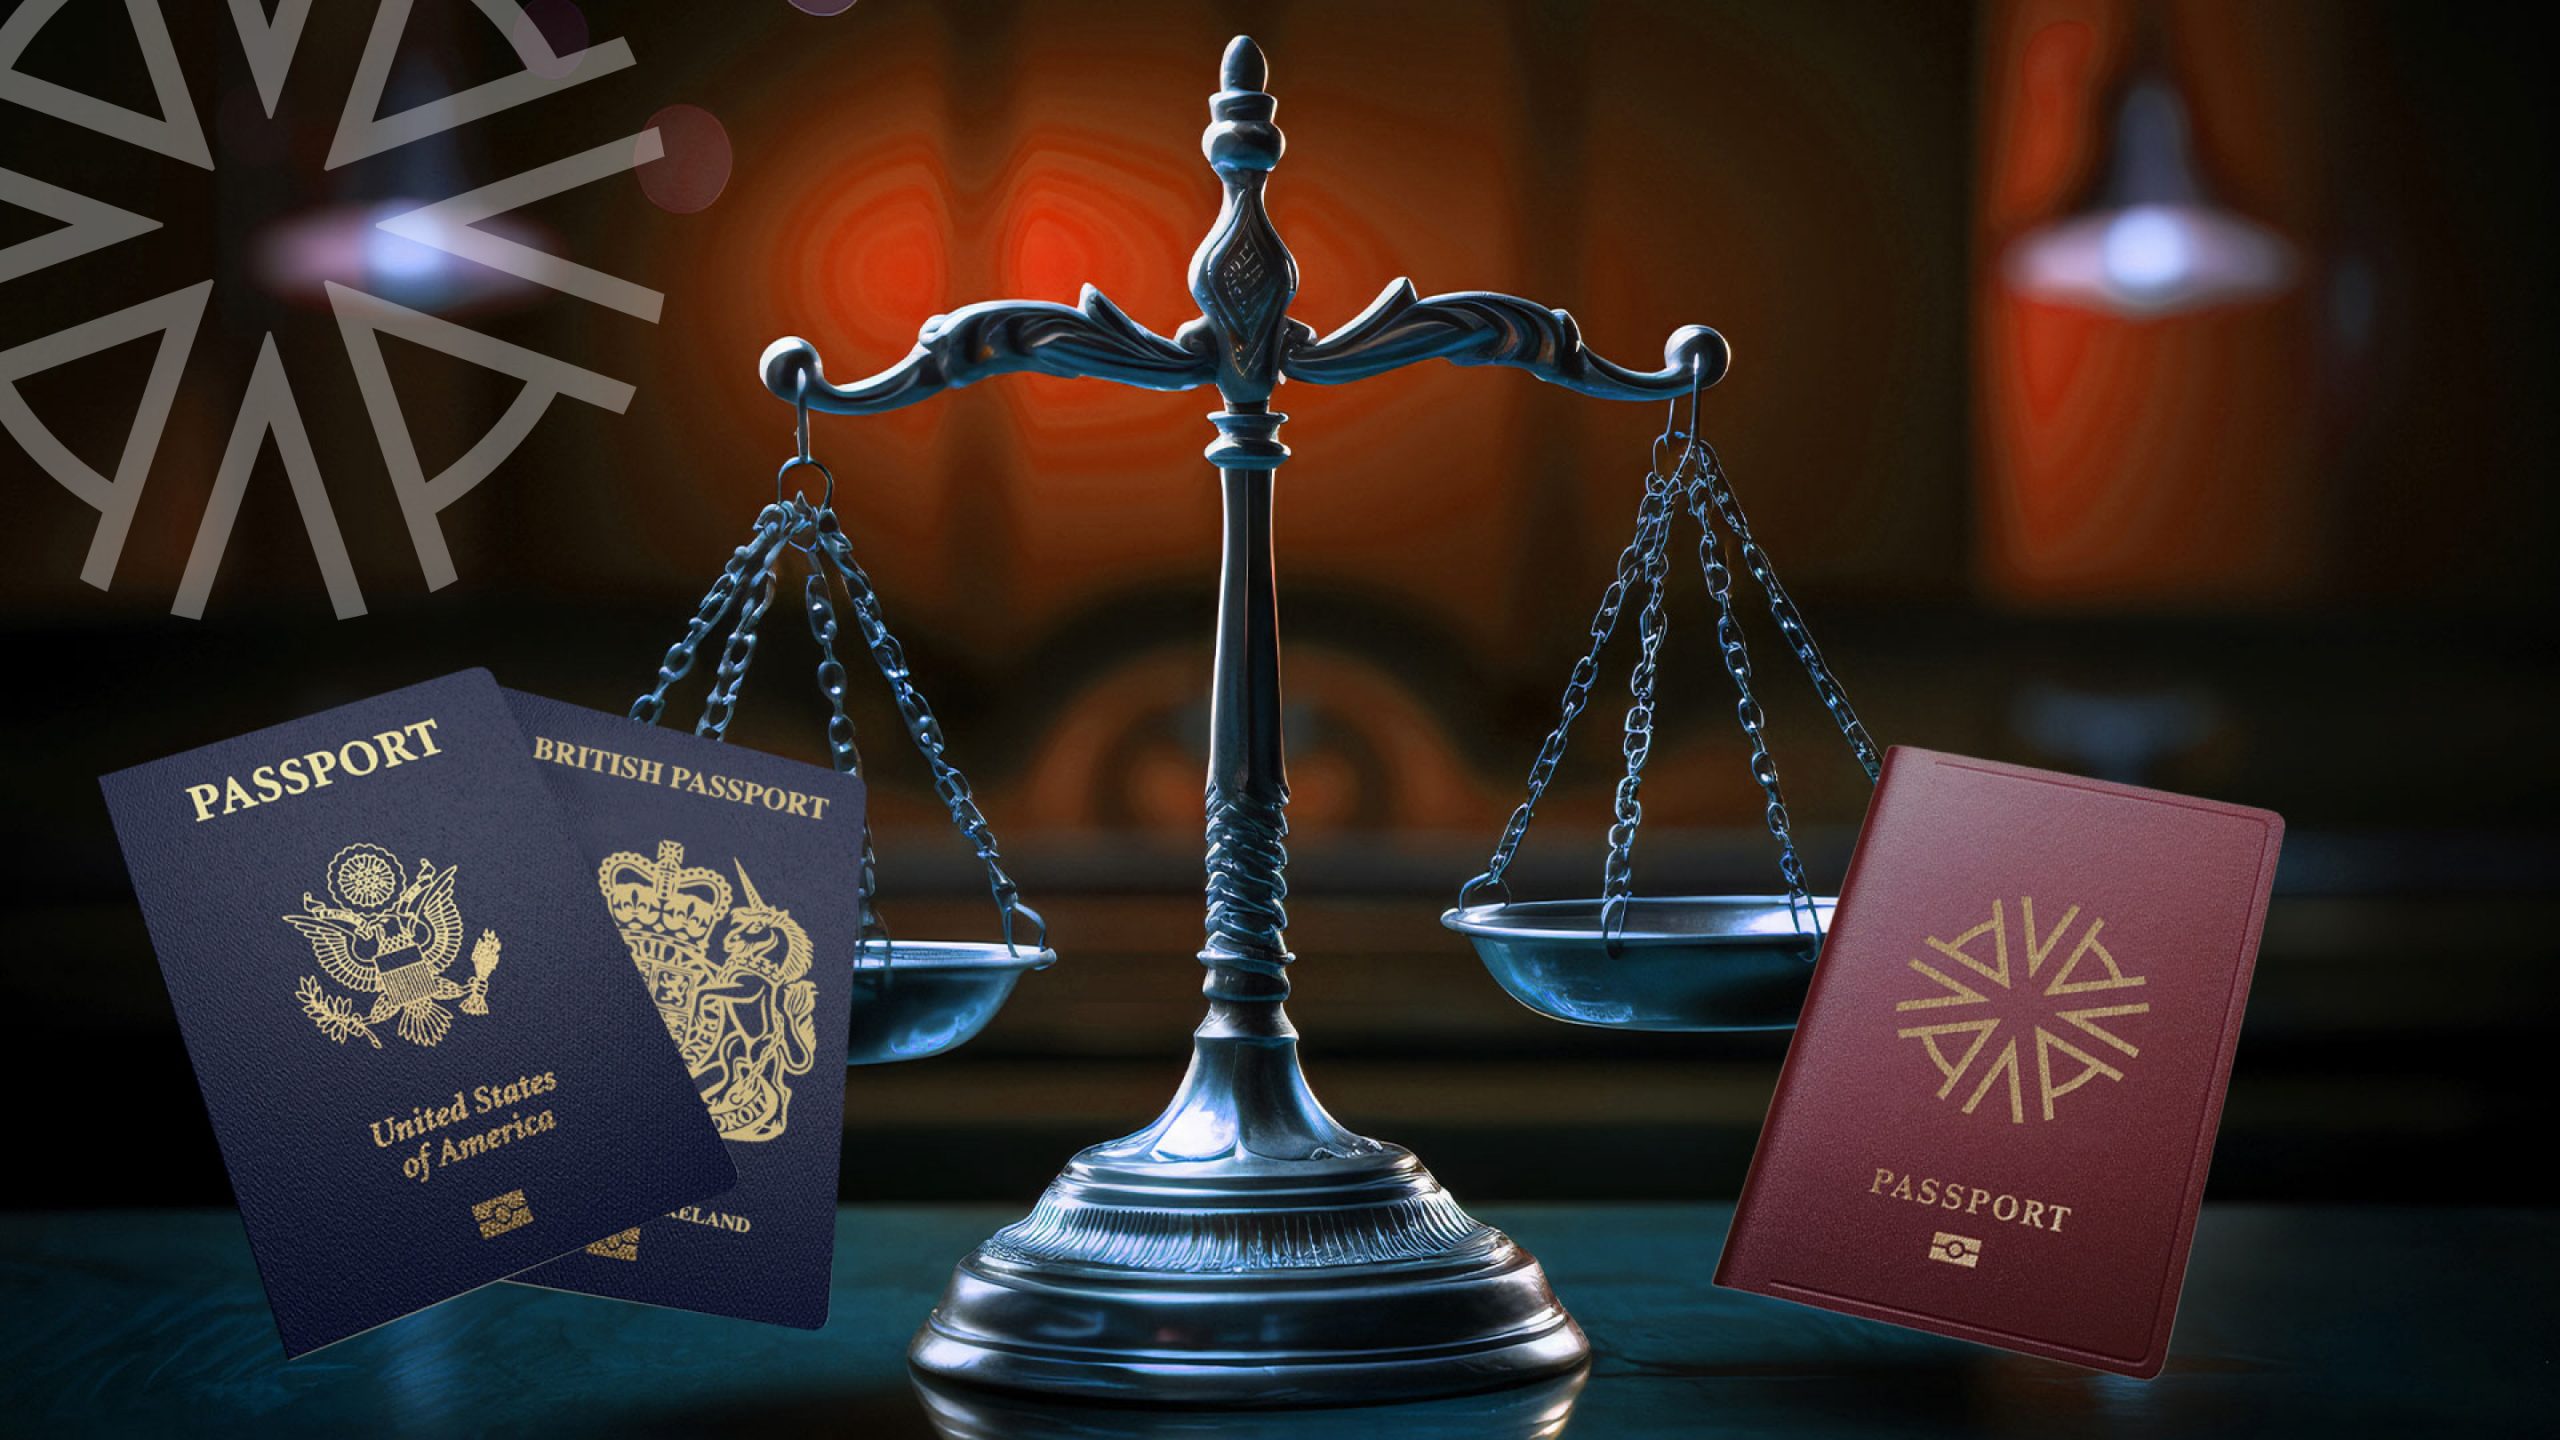 A US passport, a UK passport, and an Astons passport in front of a legal scale representing the decision of renunciation